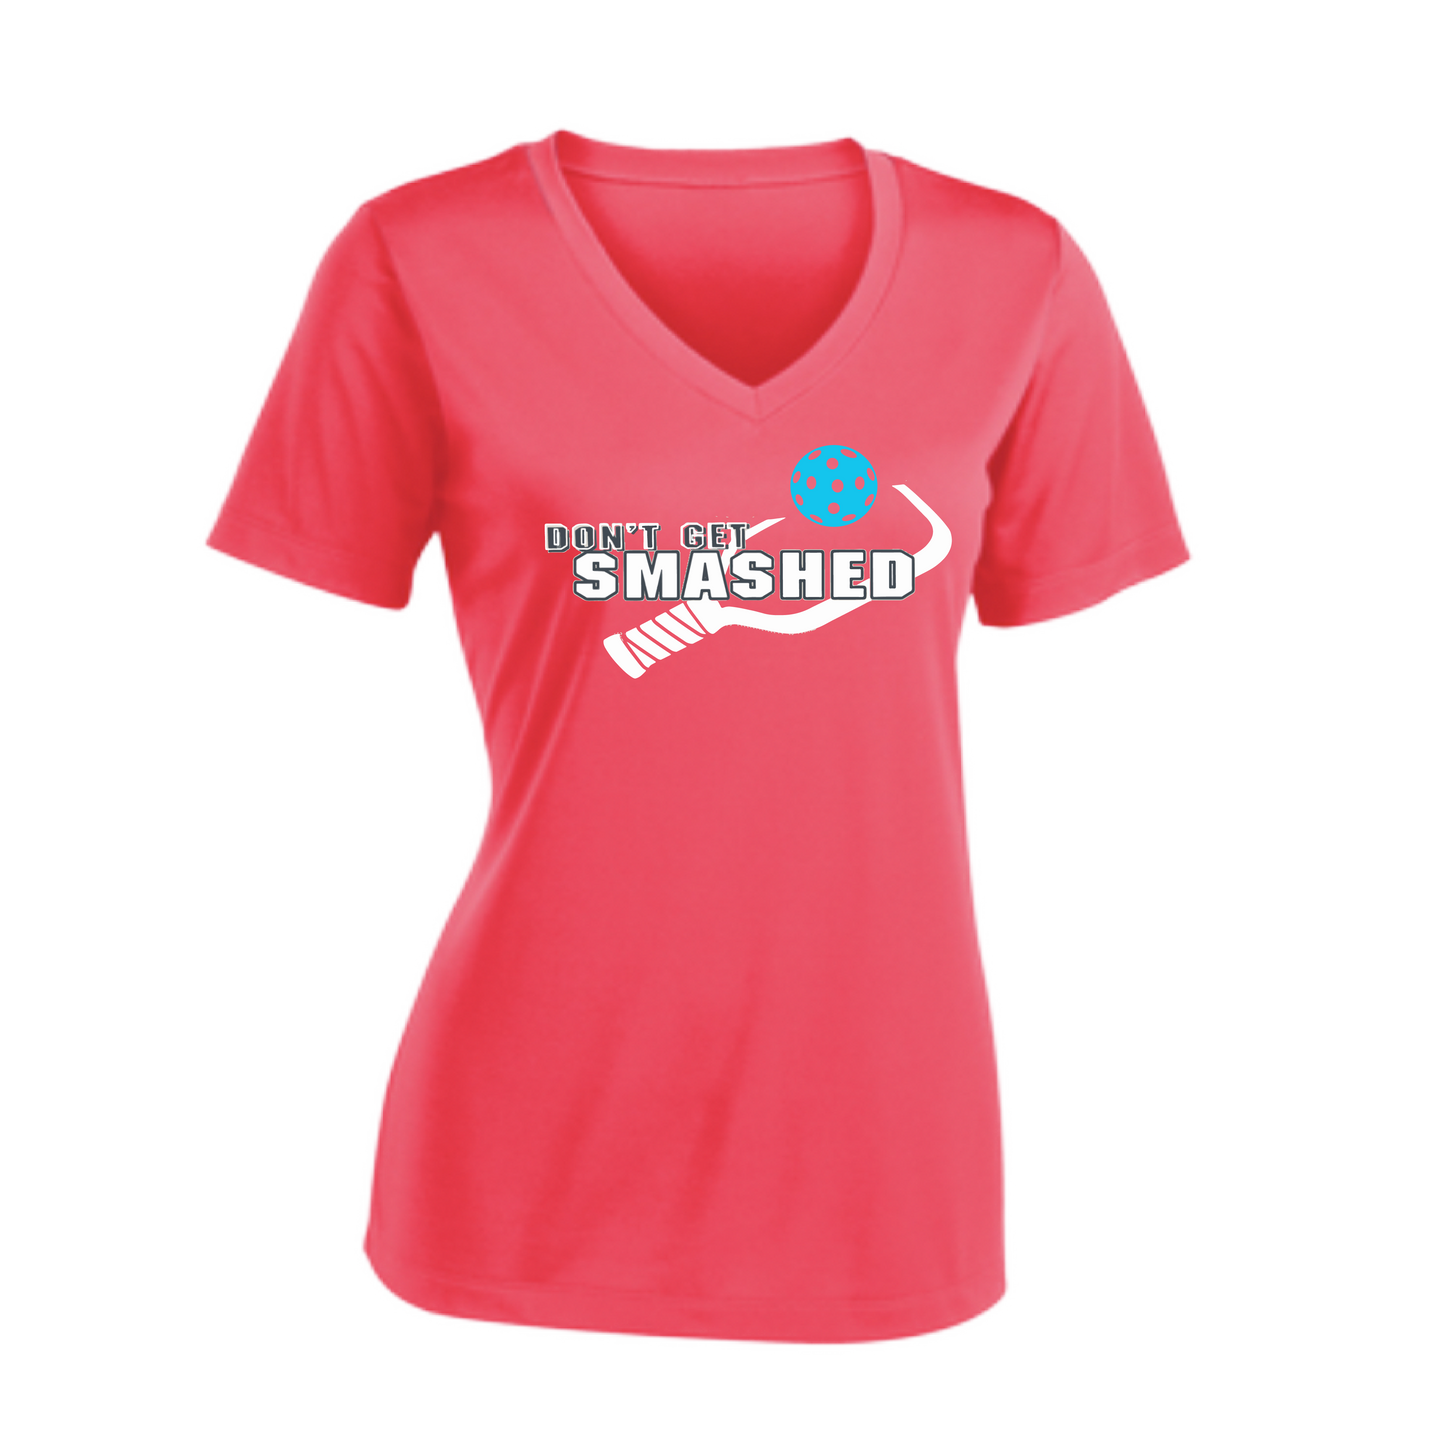 These Women's pickleball shirts provide the perfect balance of comfort and style. Crafted from a tri-blend fabric for softness and breathability, they feature PosiCharge technology to help retain color. Moisture wicking properties make this top exceptionally lightweight.